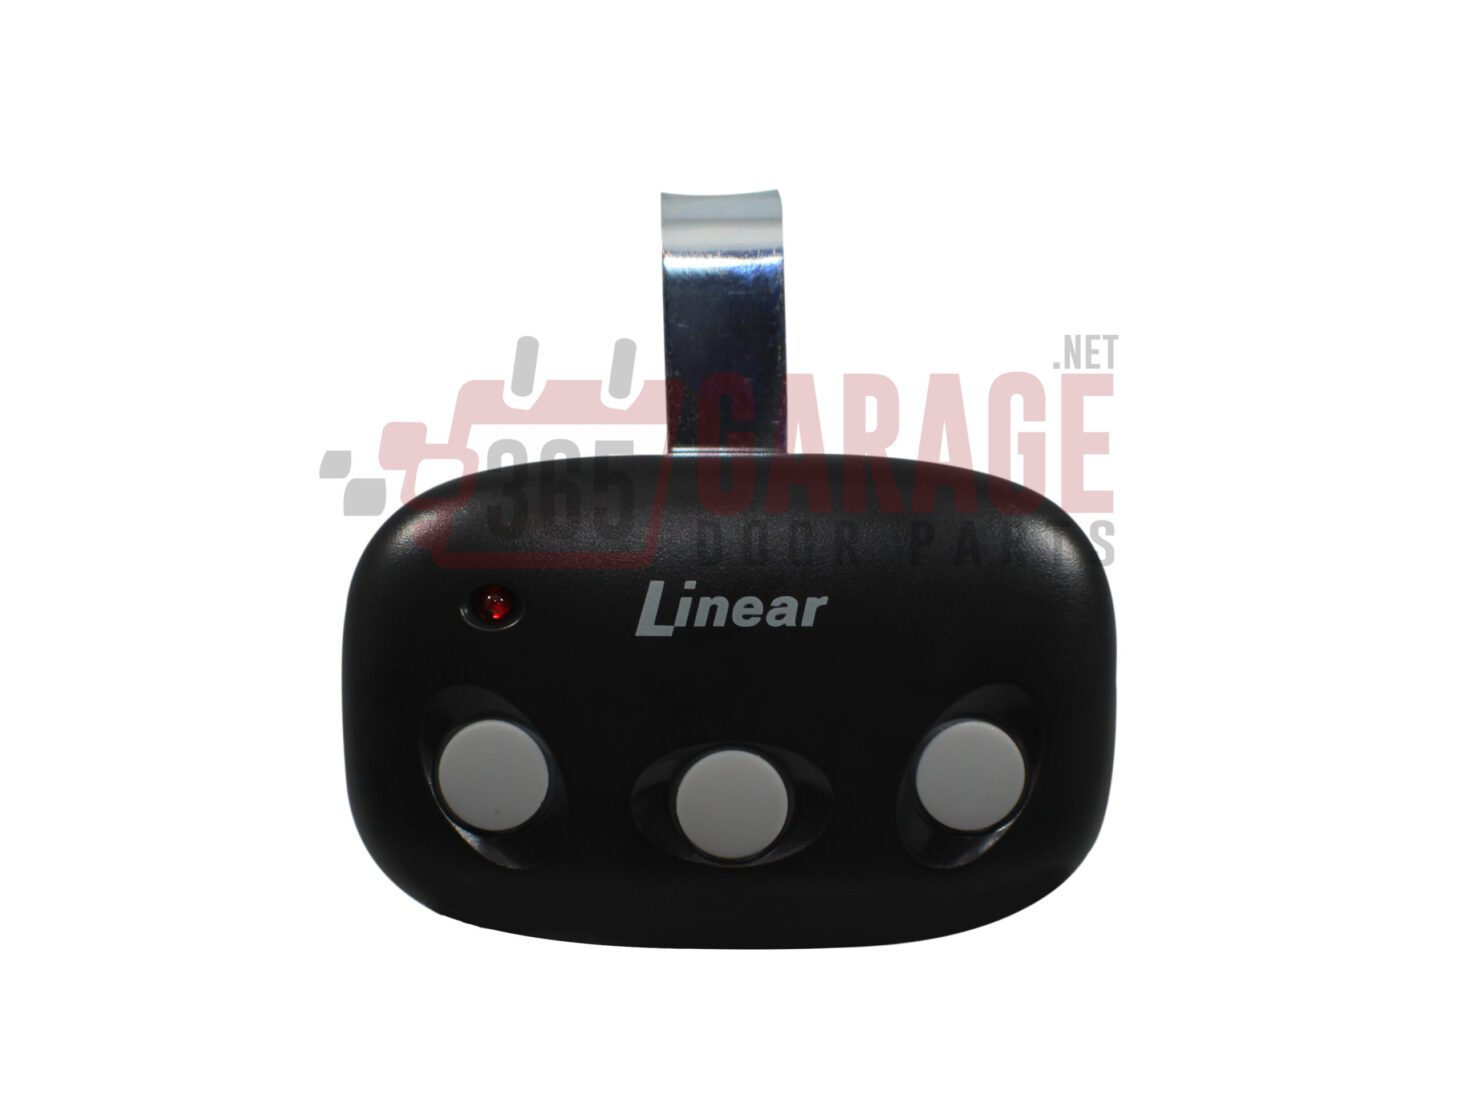 Linear 3 Button Megacode Remote Garage Door and Gate Opener DNT00089 